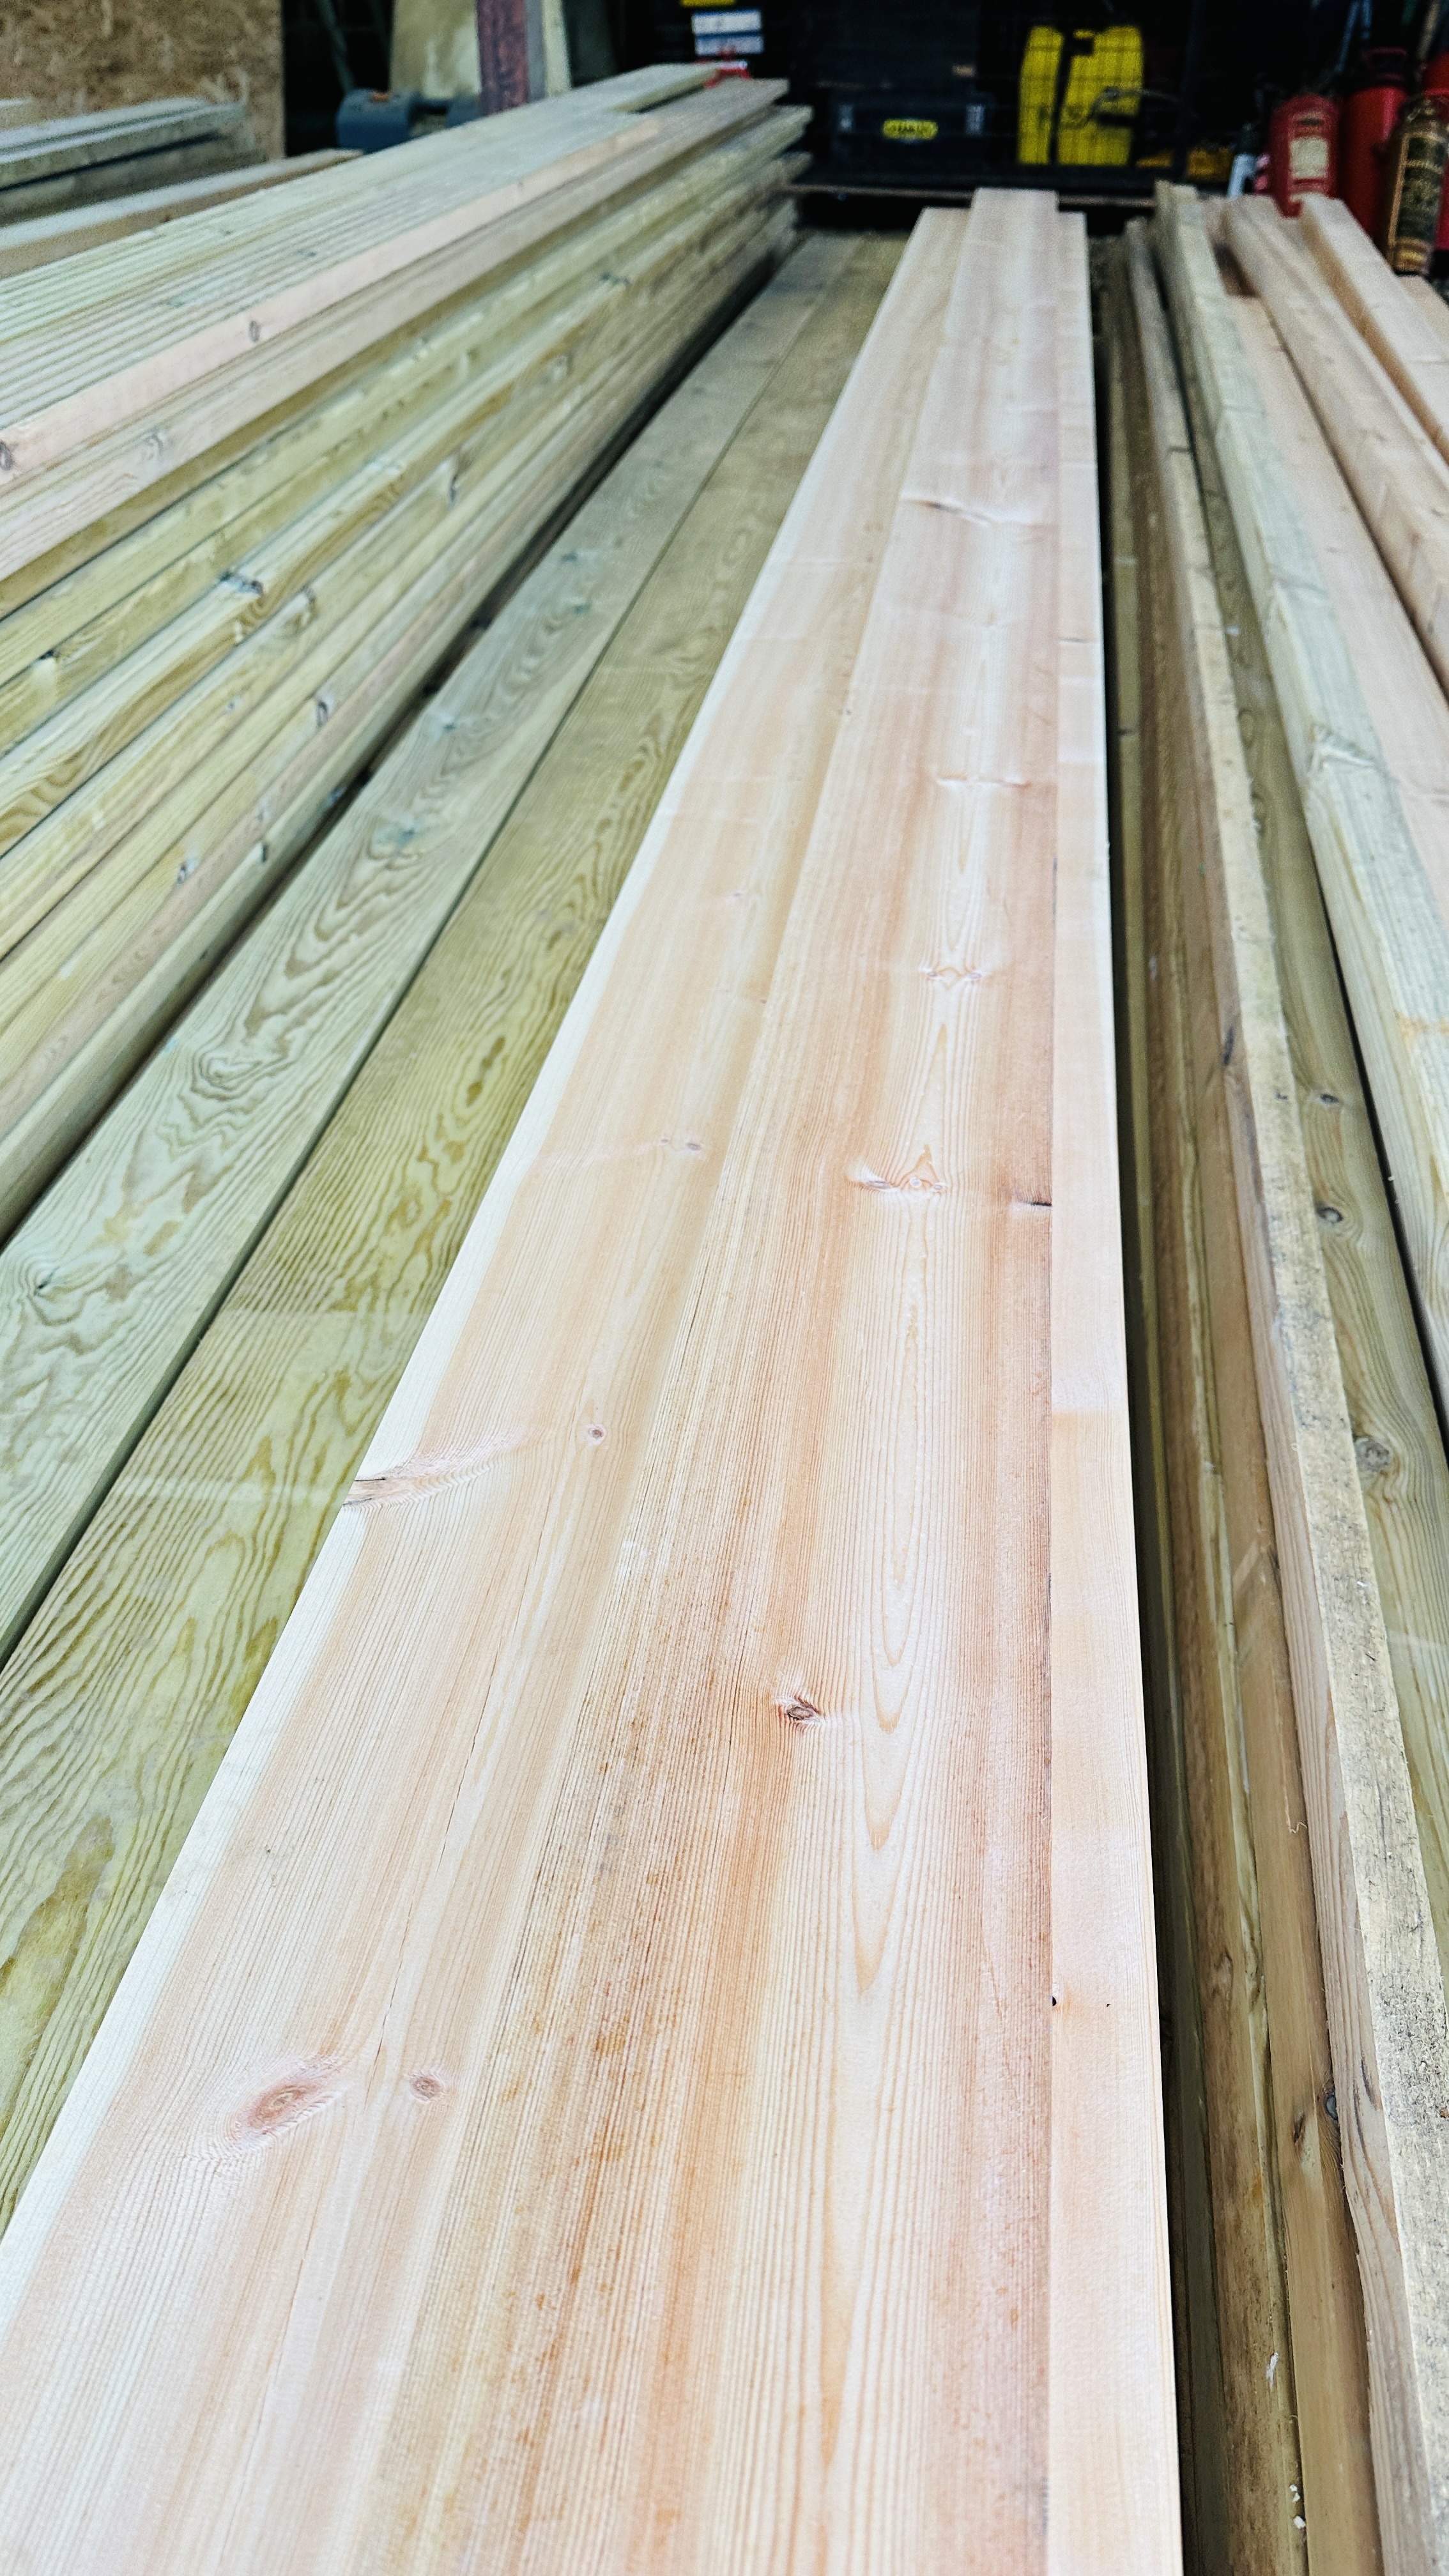 17 X 3.9 METRE LENGTH 145MM X 35MM PLANED TIMBER. THIS LOT IS SUBJECT TO VAT ON HAMMER PRICE. - Image 3 of 3